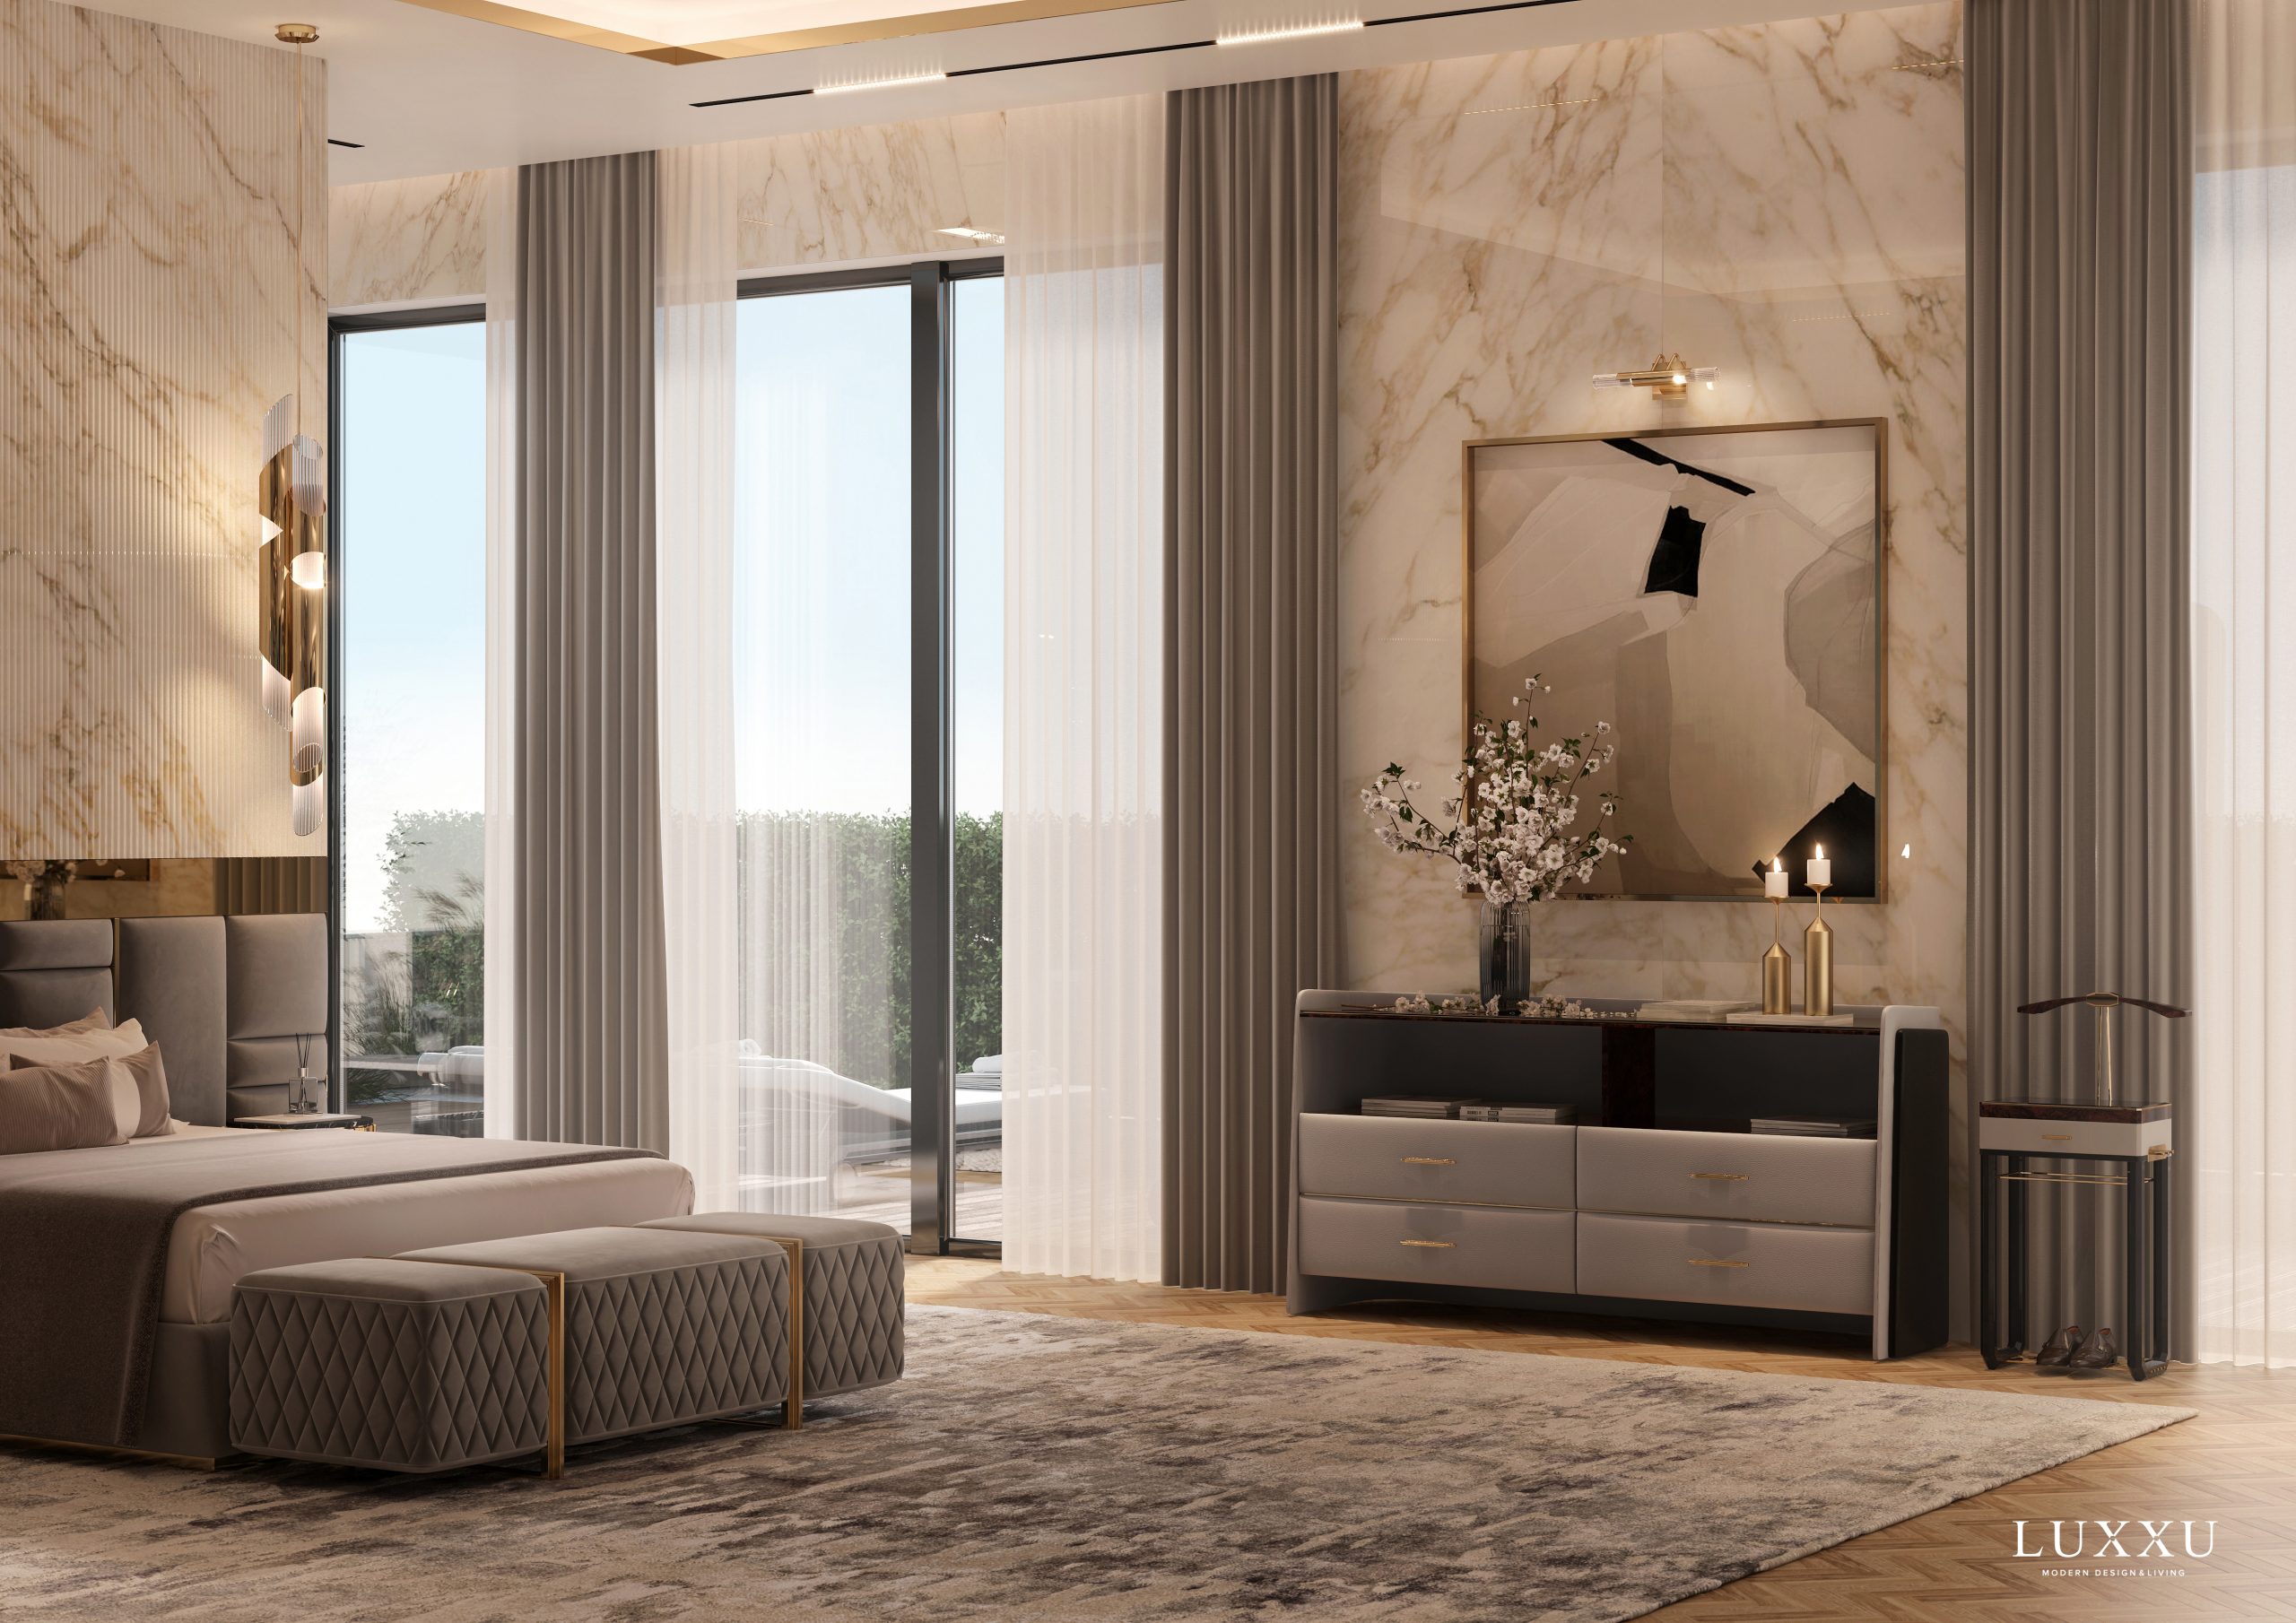 Classical bedroom with stunning essentials pieces by Luxxu